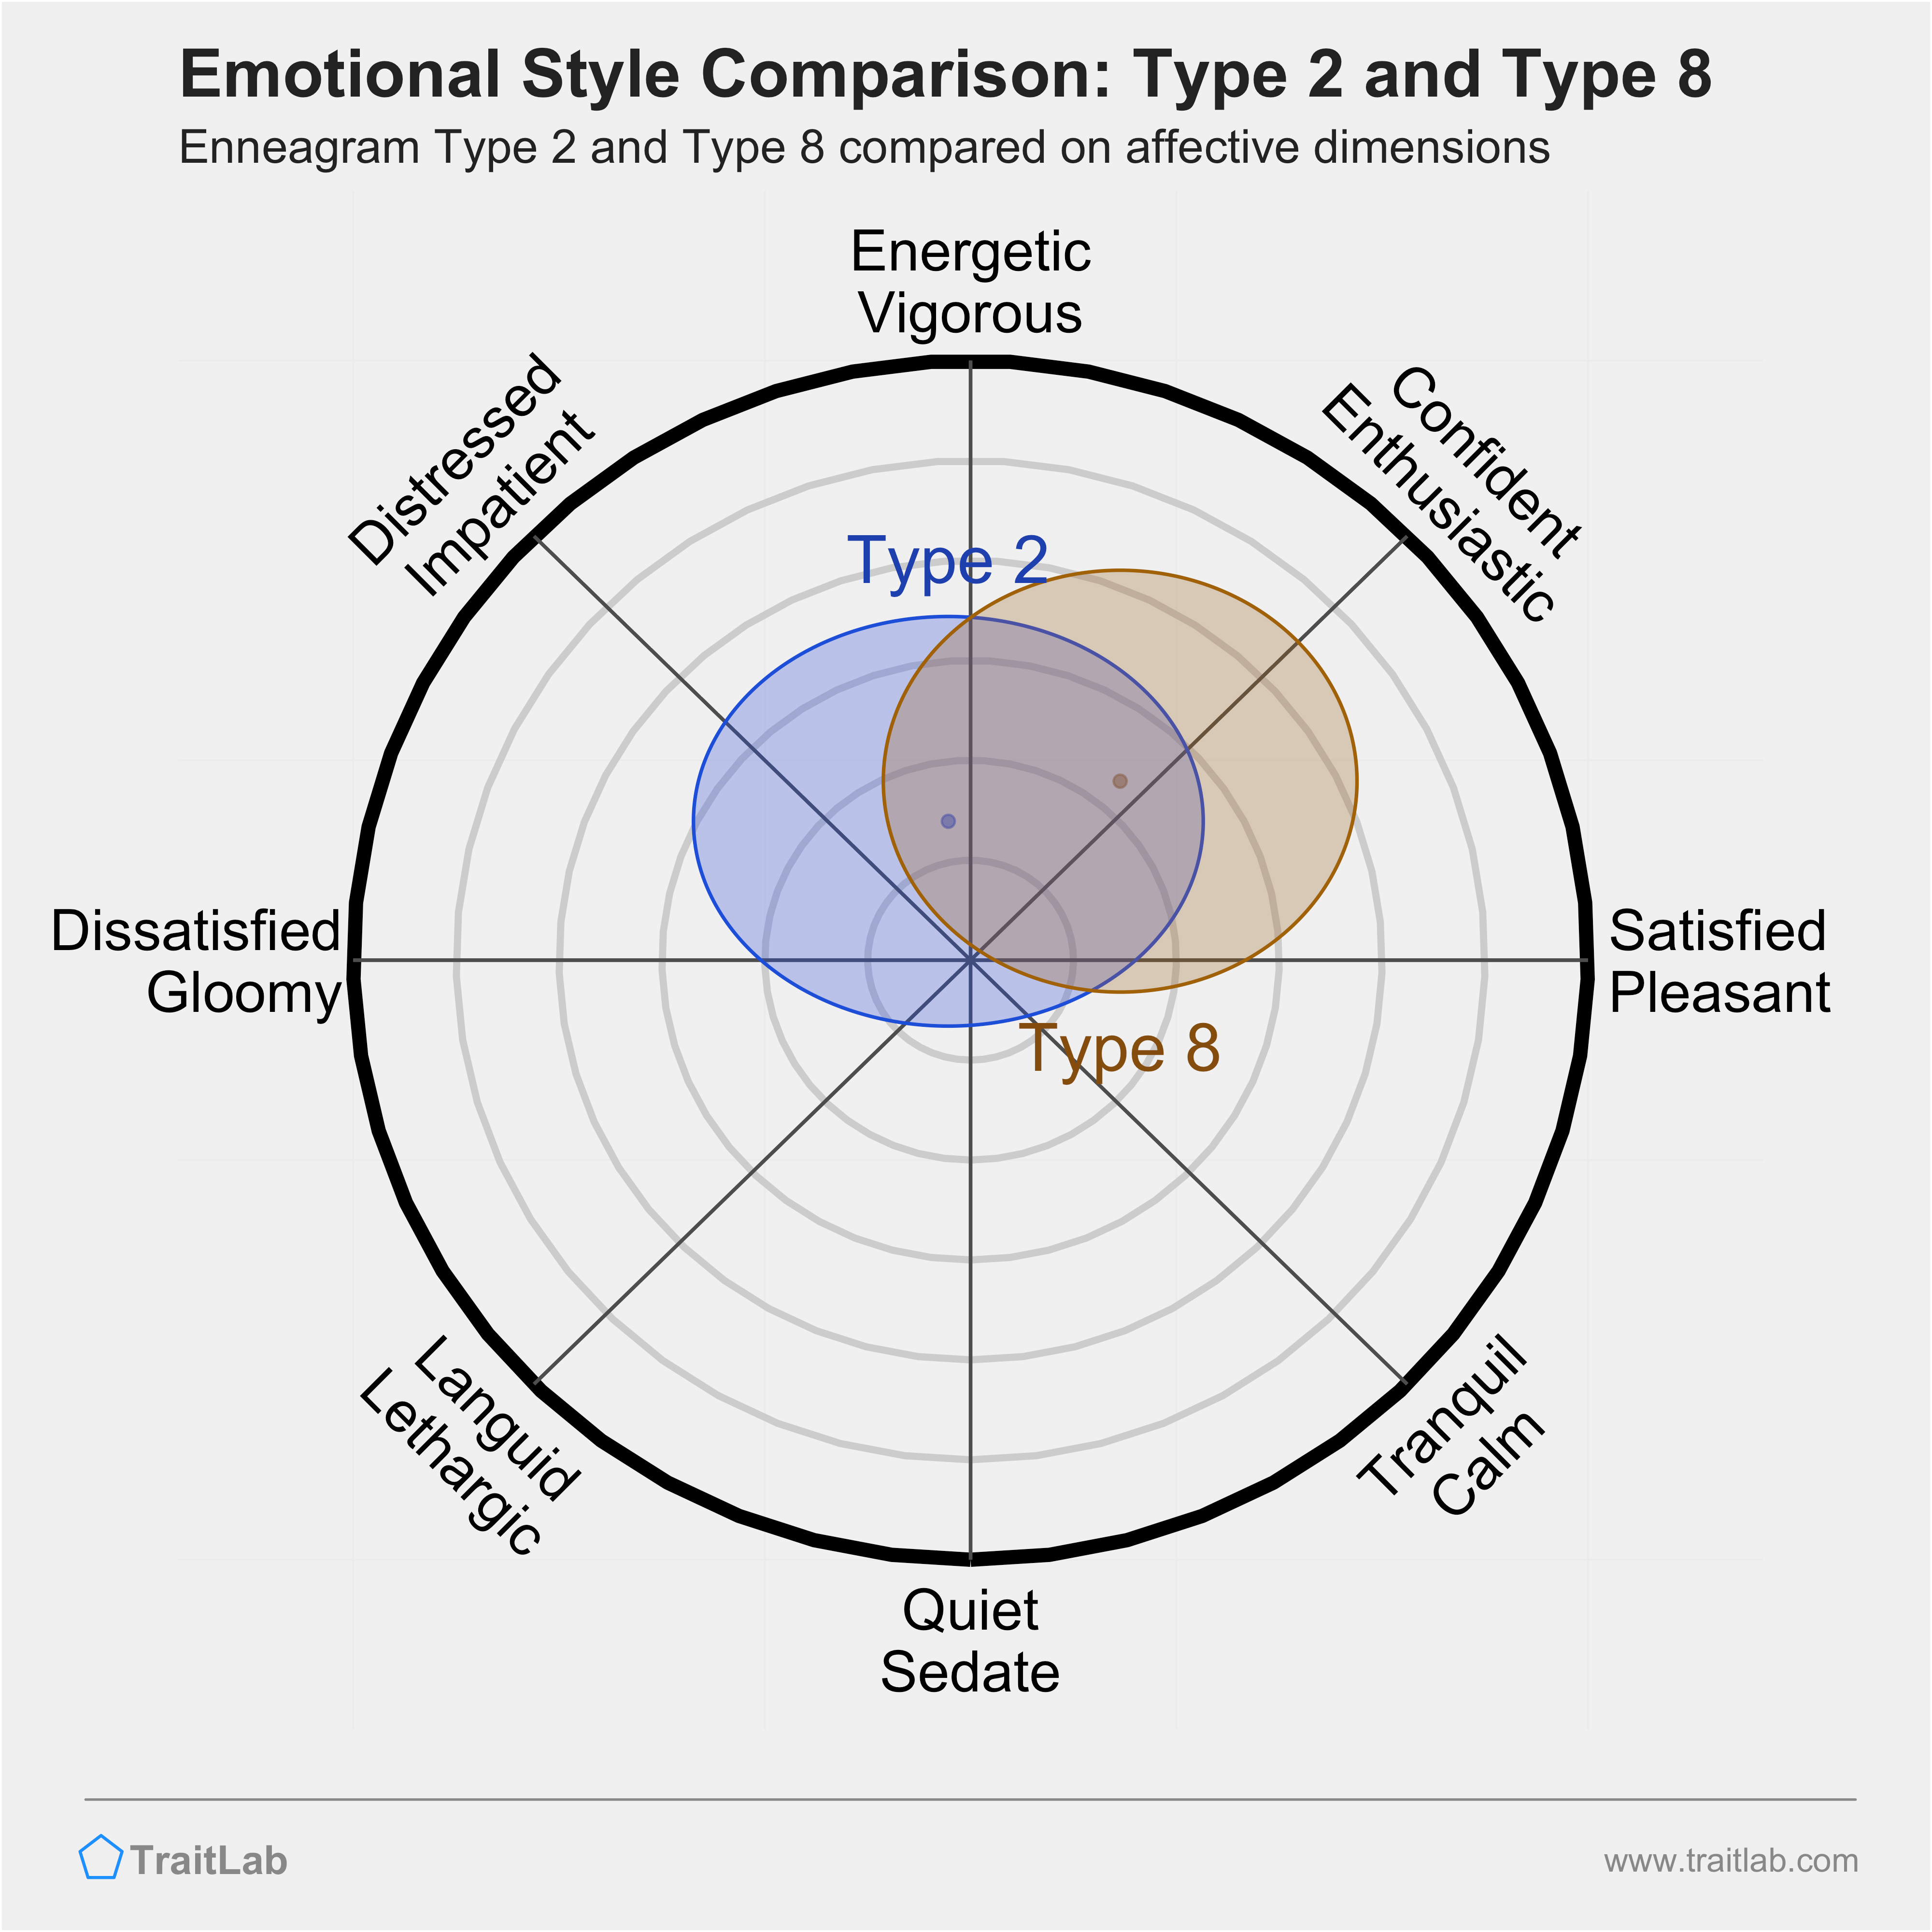 Type 2 and Type 8 comparison across emotional (affective) dimensions